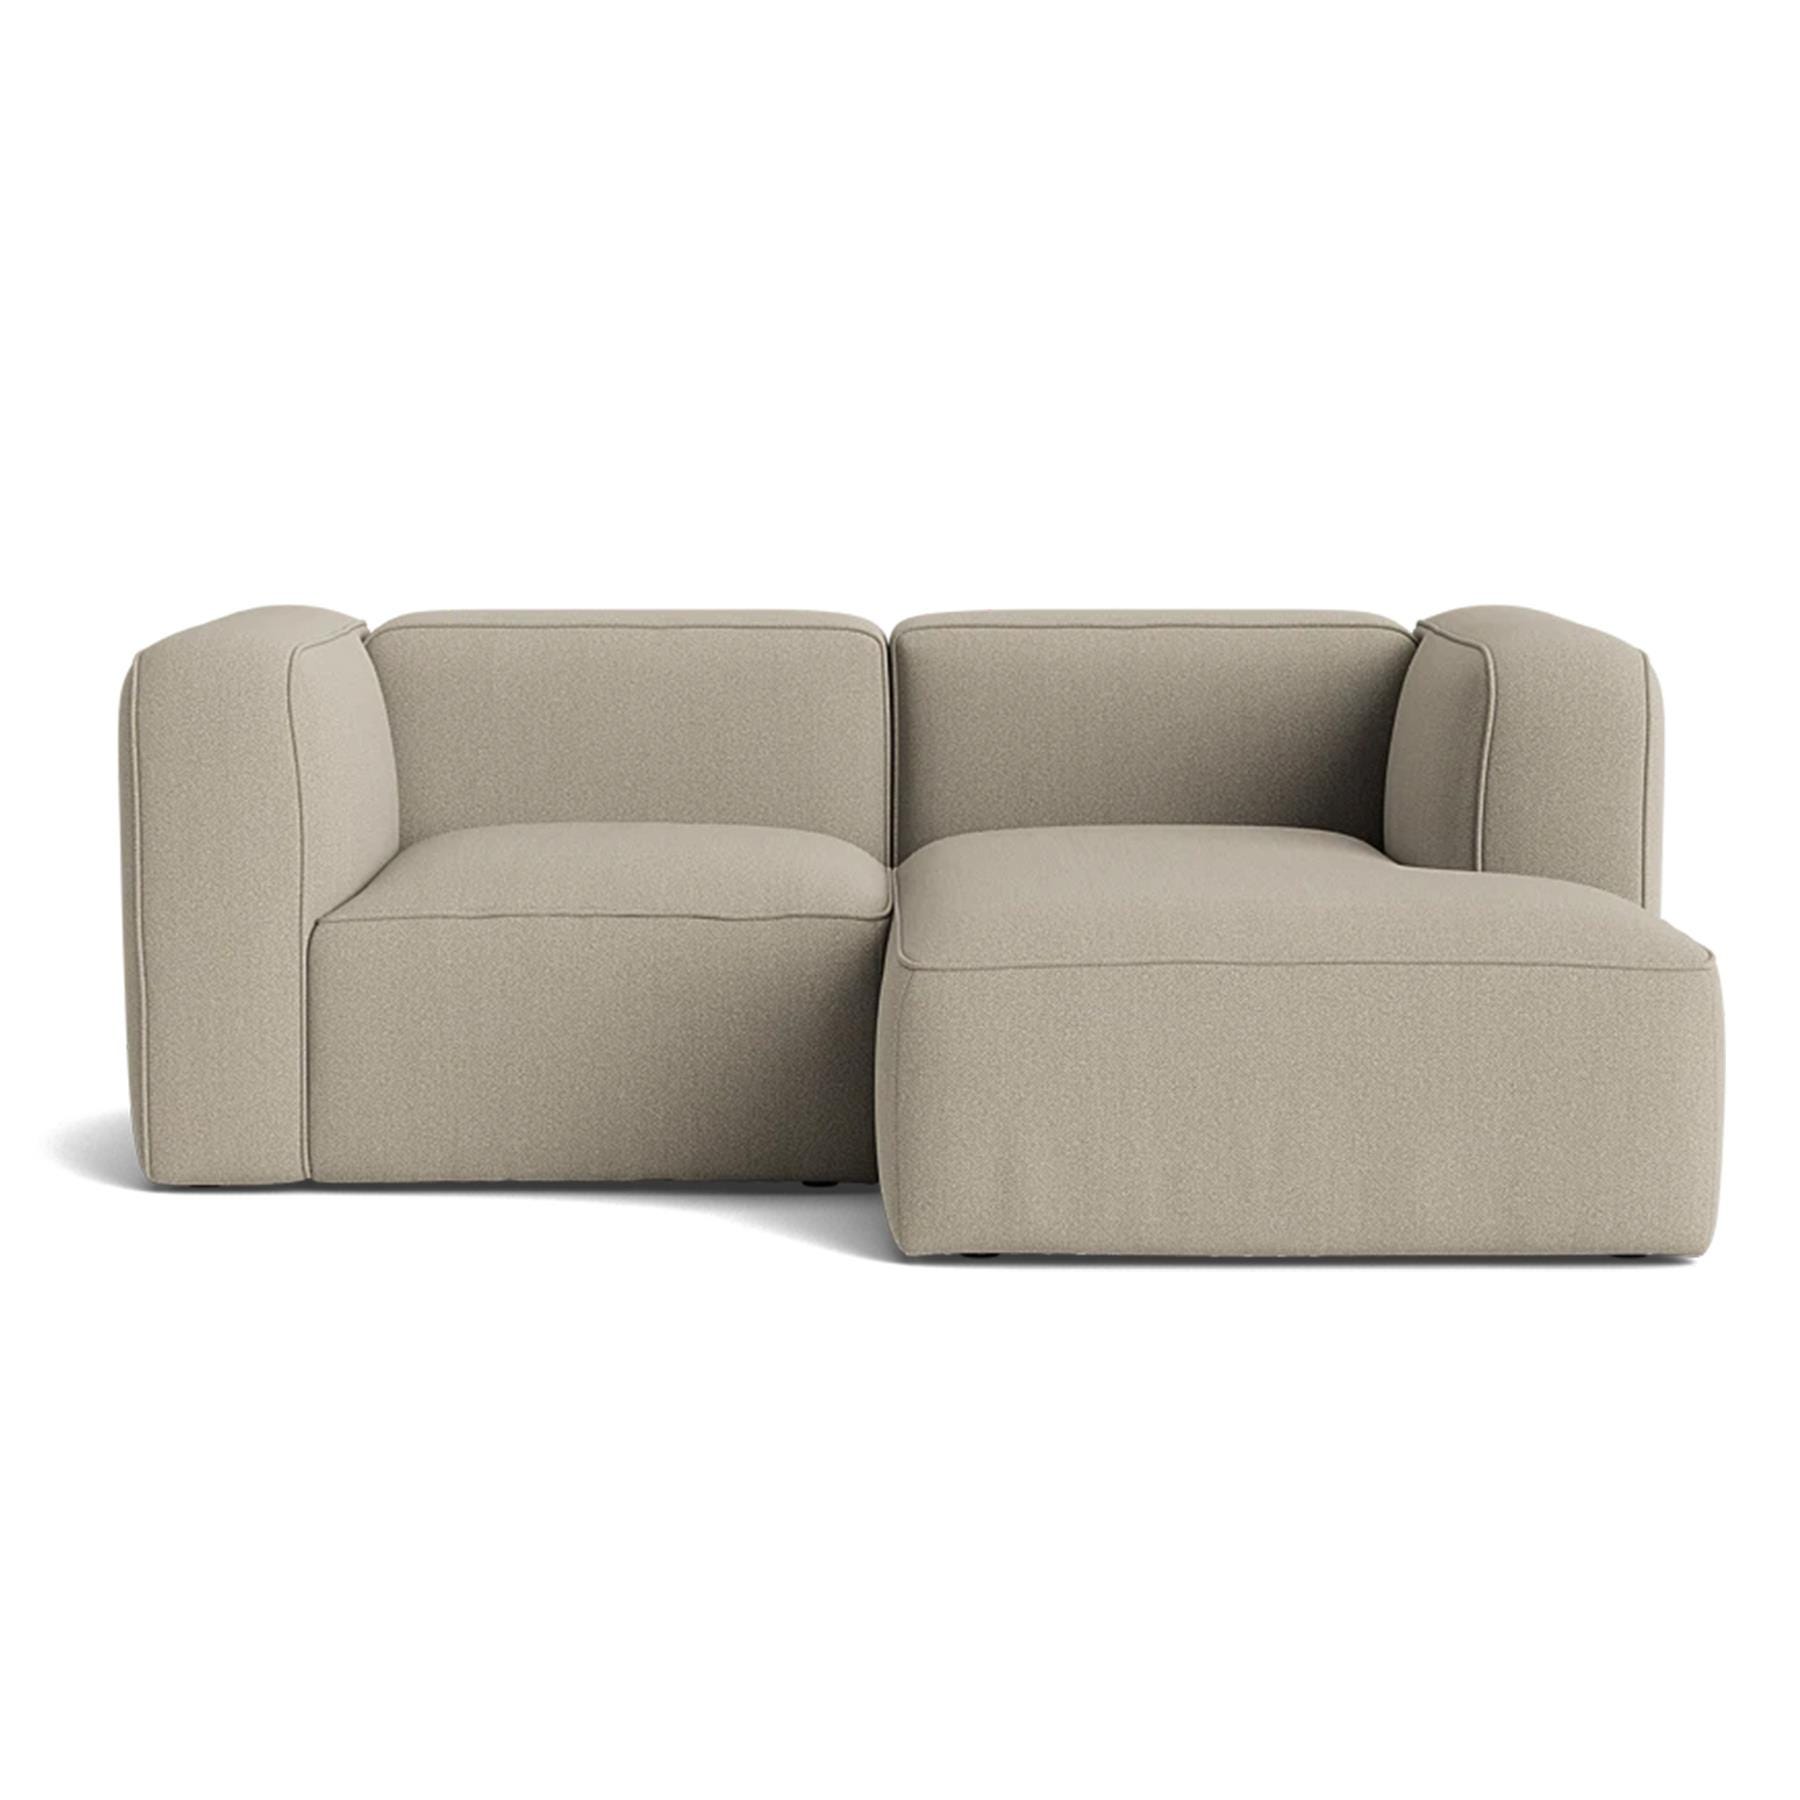 Make Nordic Basecamp Small Sofa Hallingdal 220 Right Brown Designer Furniture From Holloways Of Ludlow